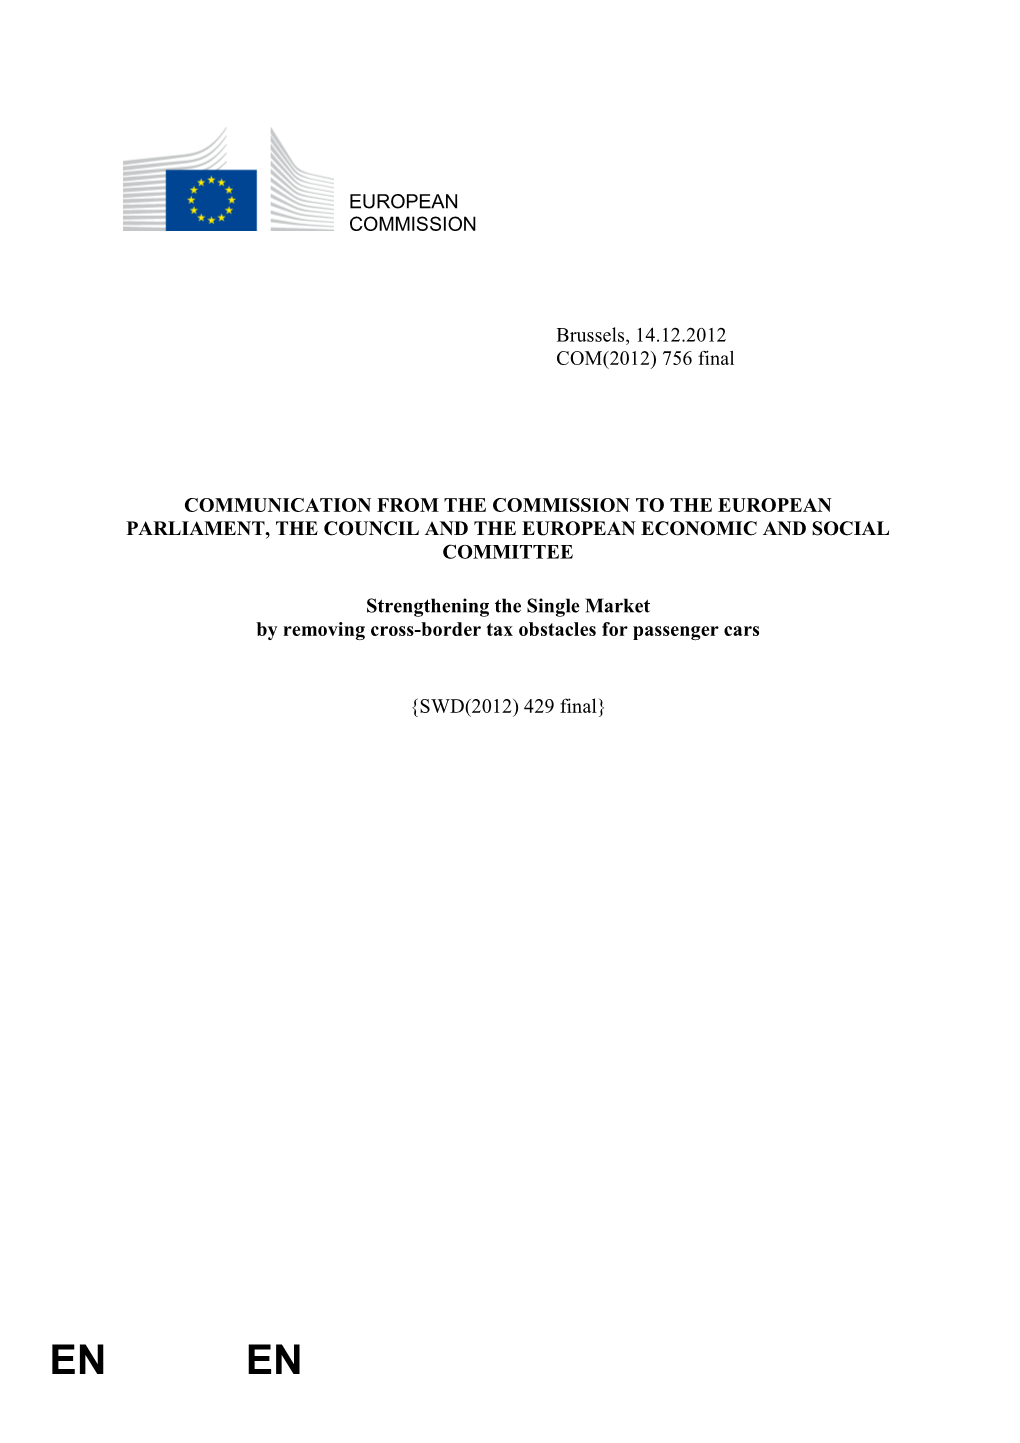 Communication from the Commission to the European Parliament, the Council and the European